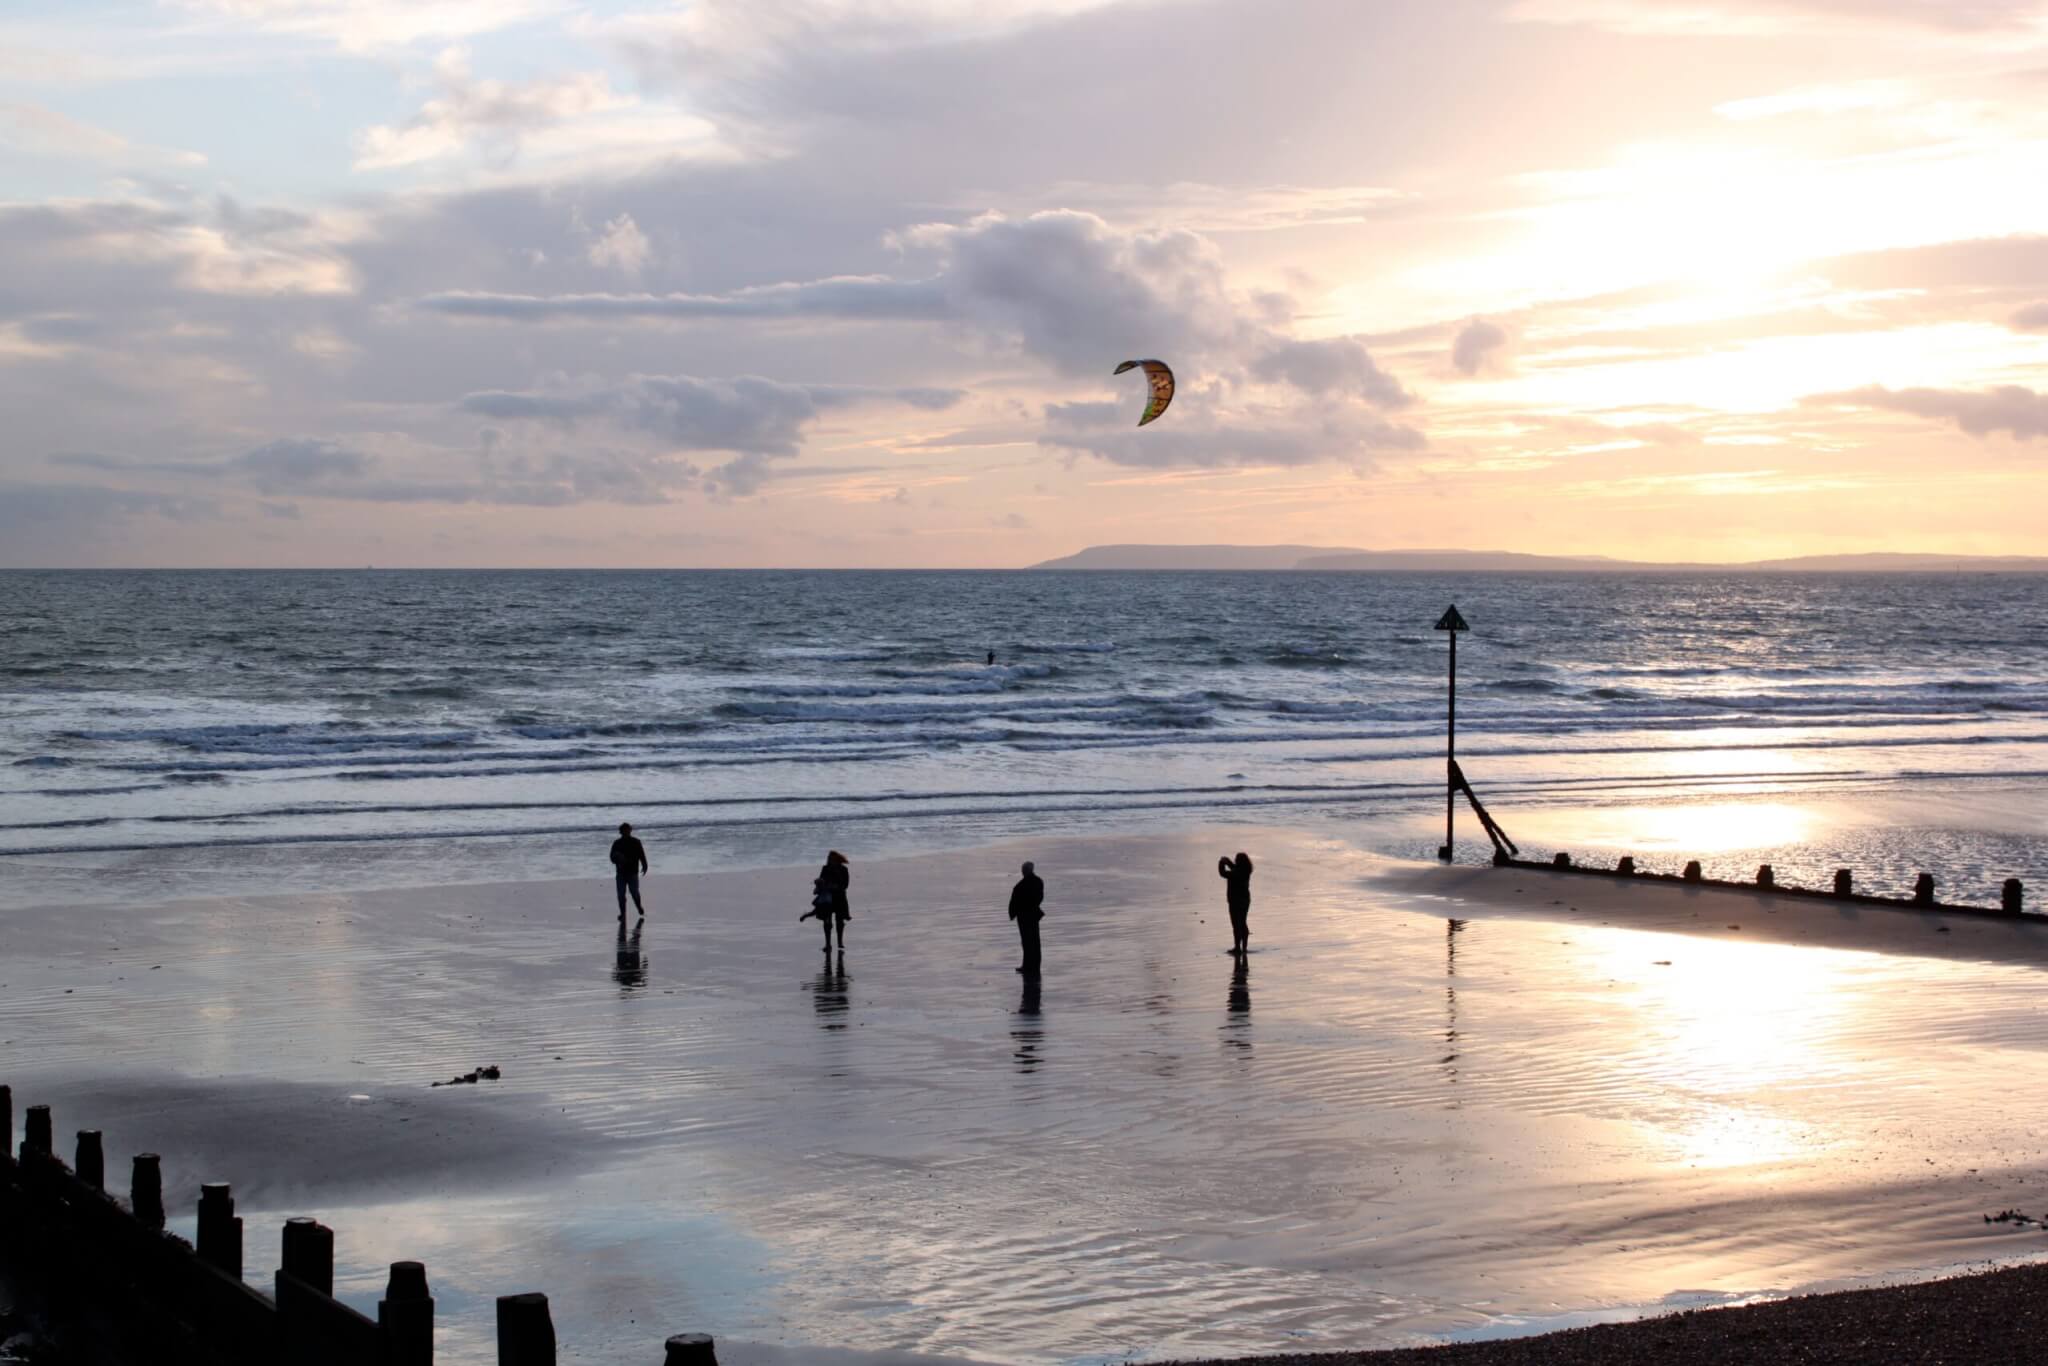 7. Home page gallery - people on beach and kite surfer